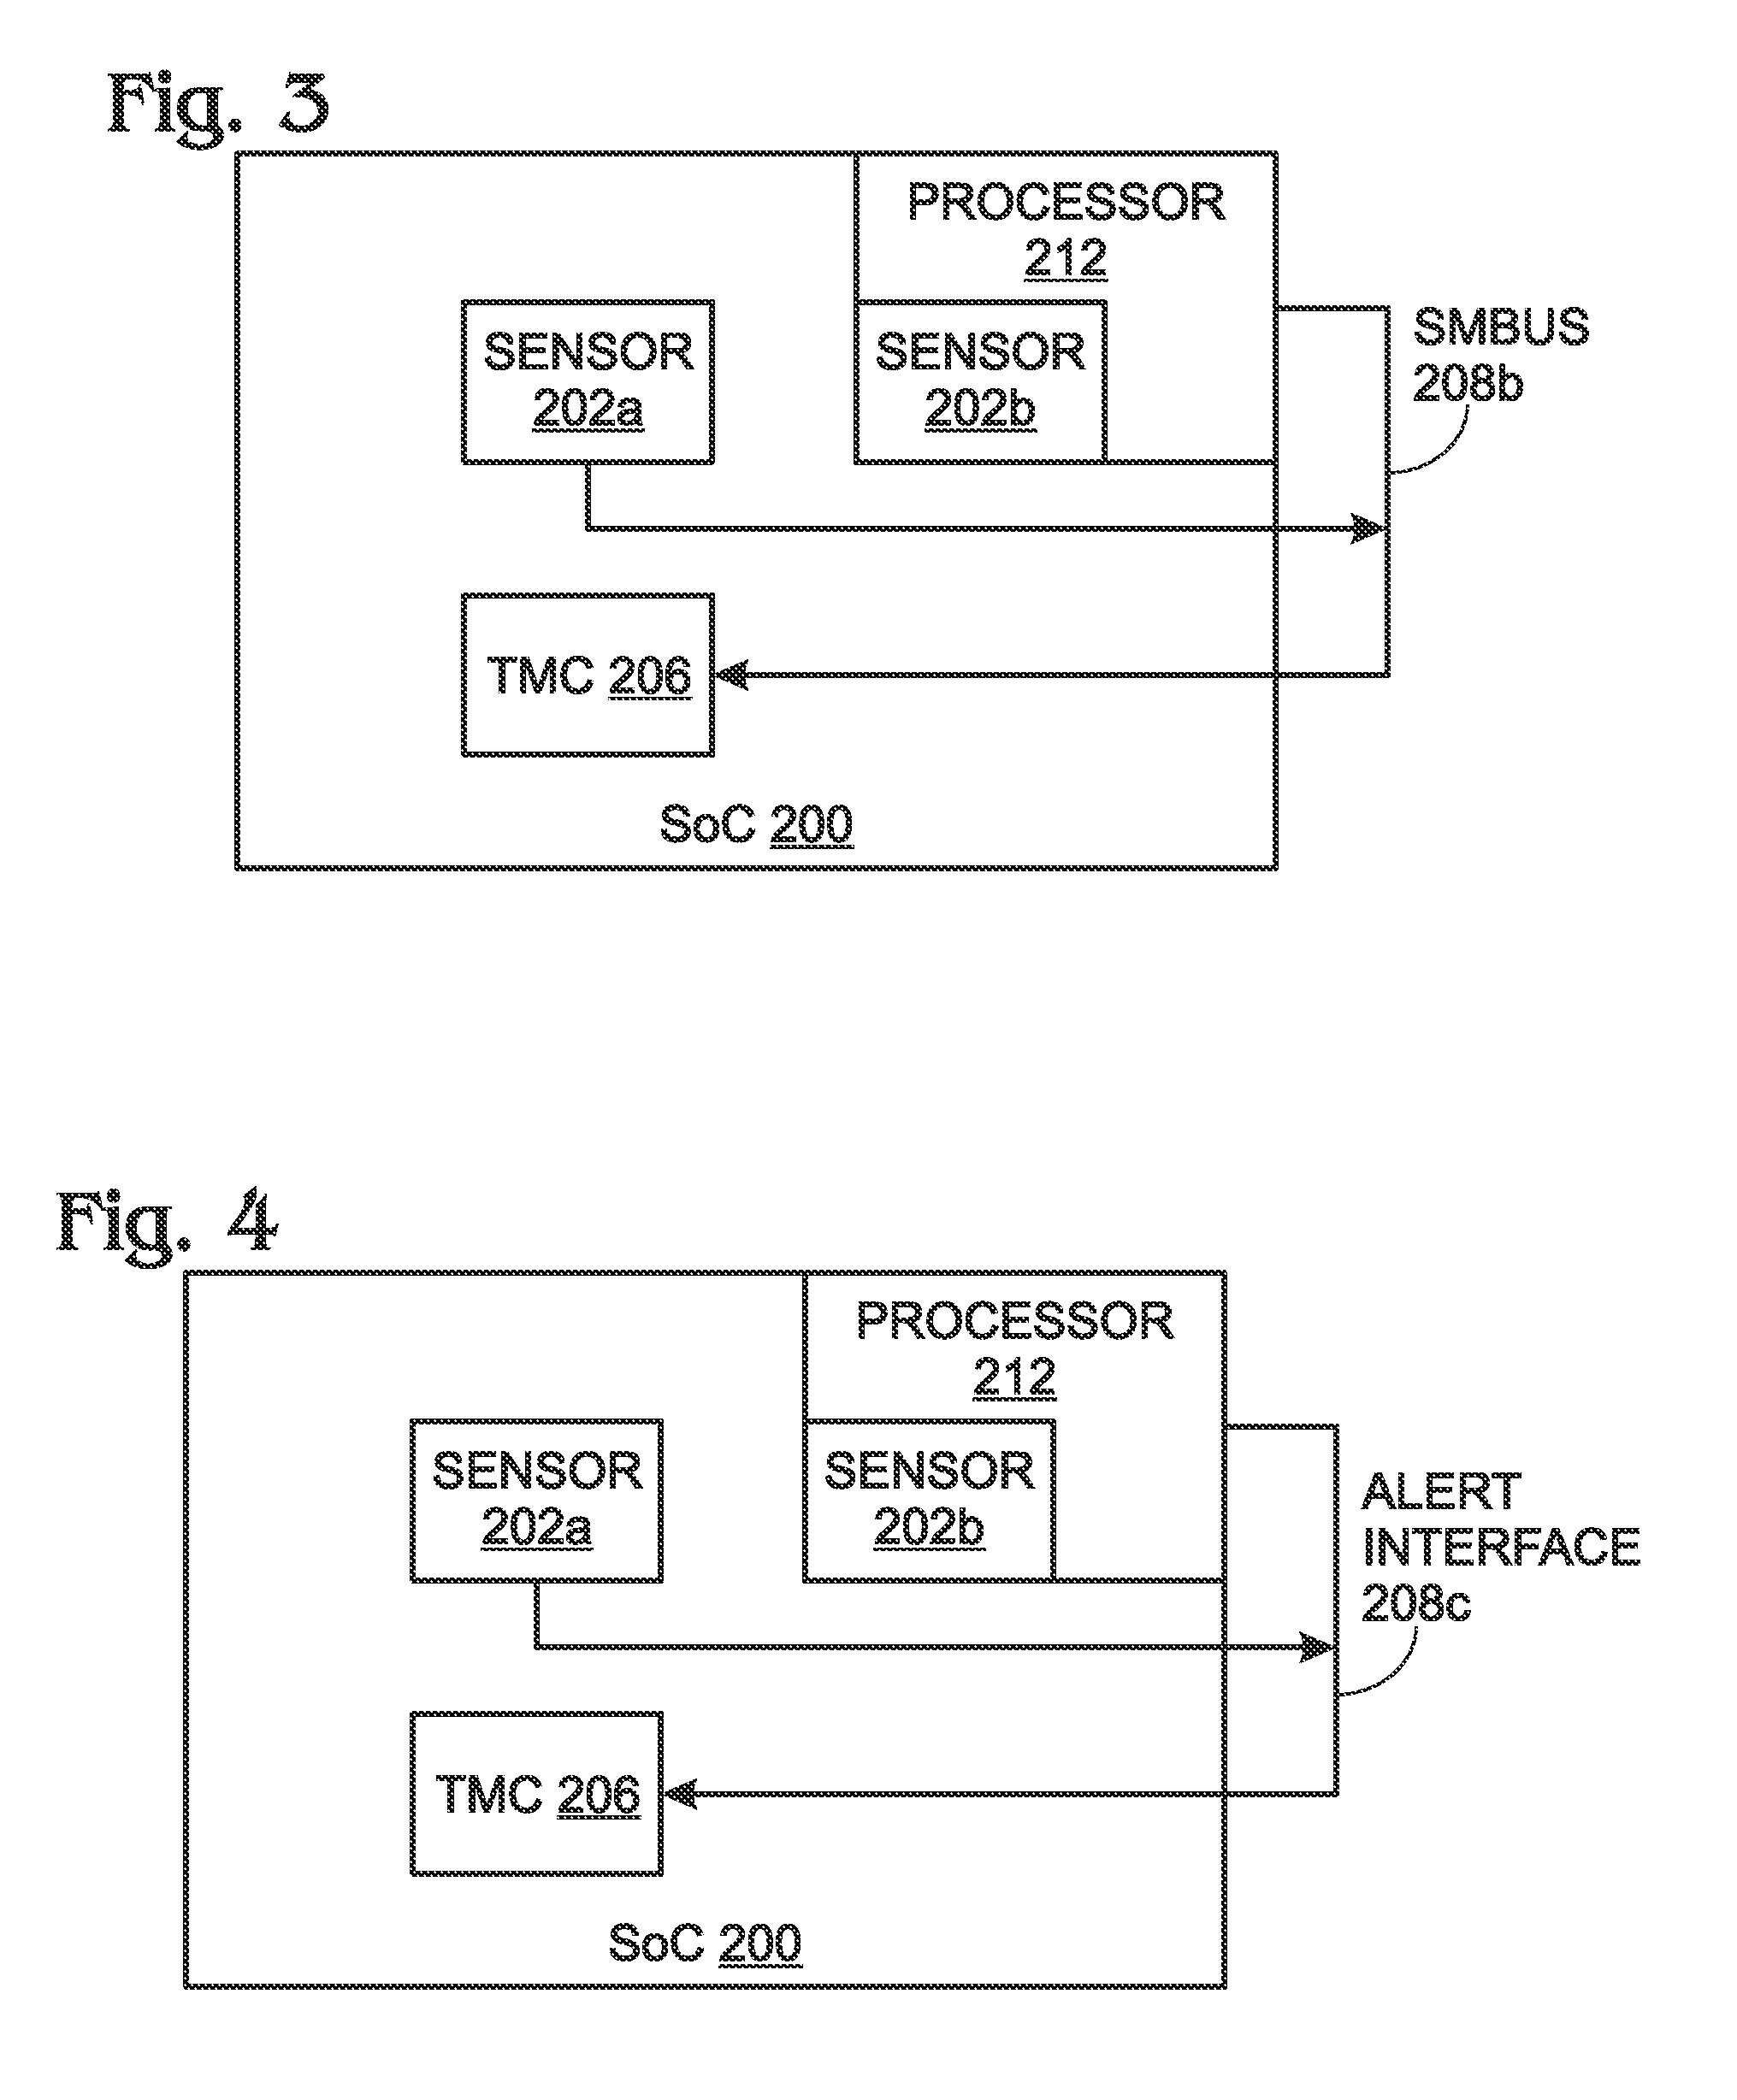 System-on-chip with thermal management core